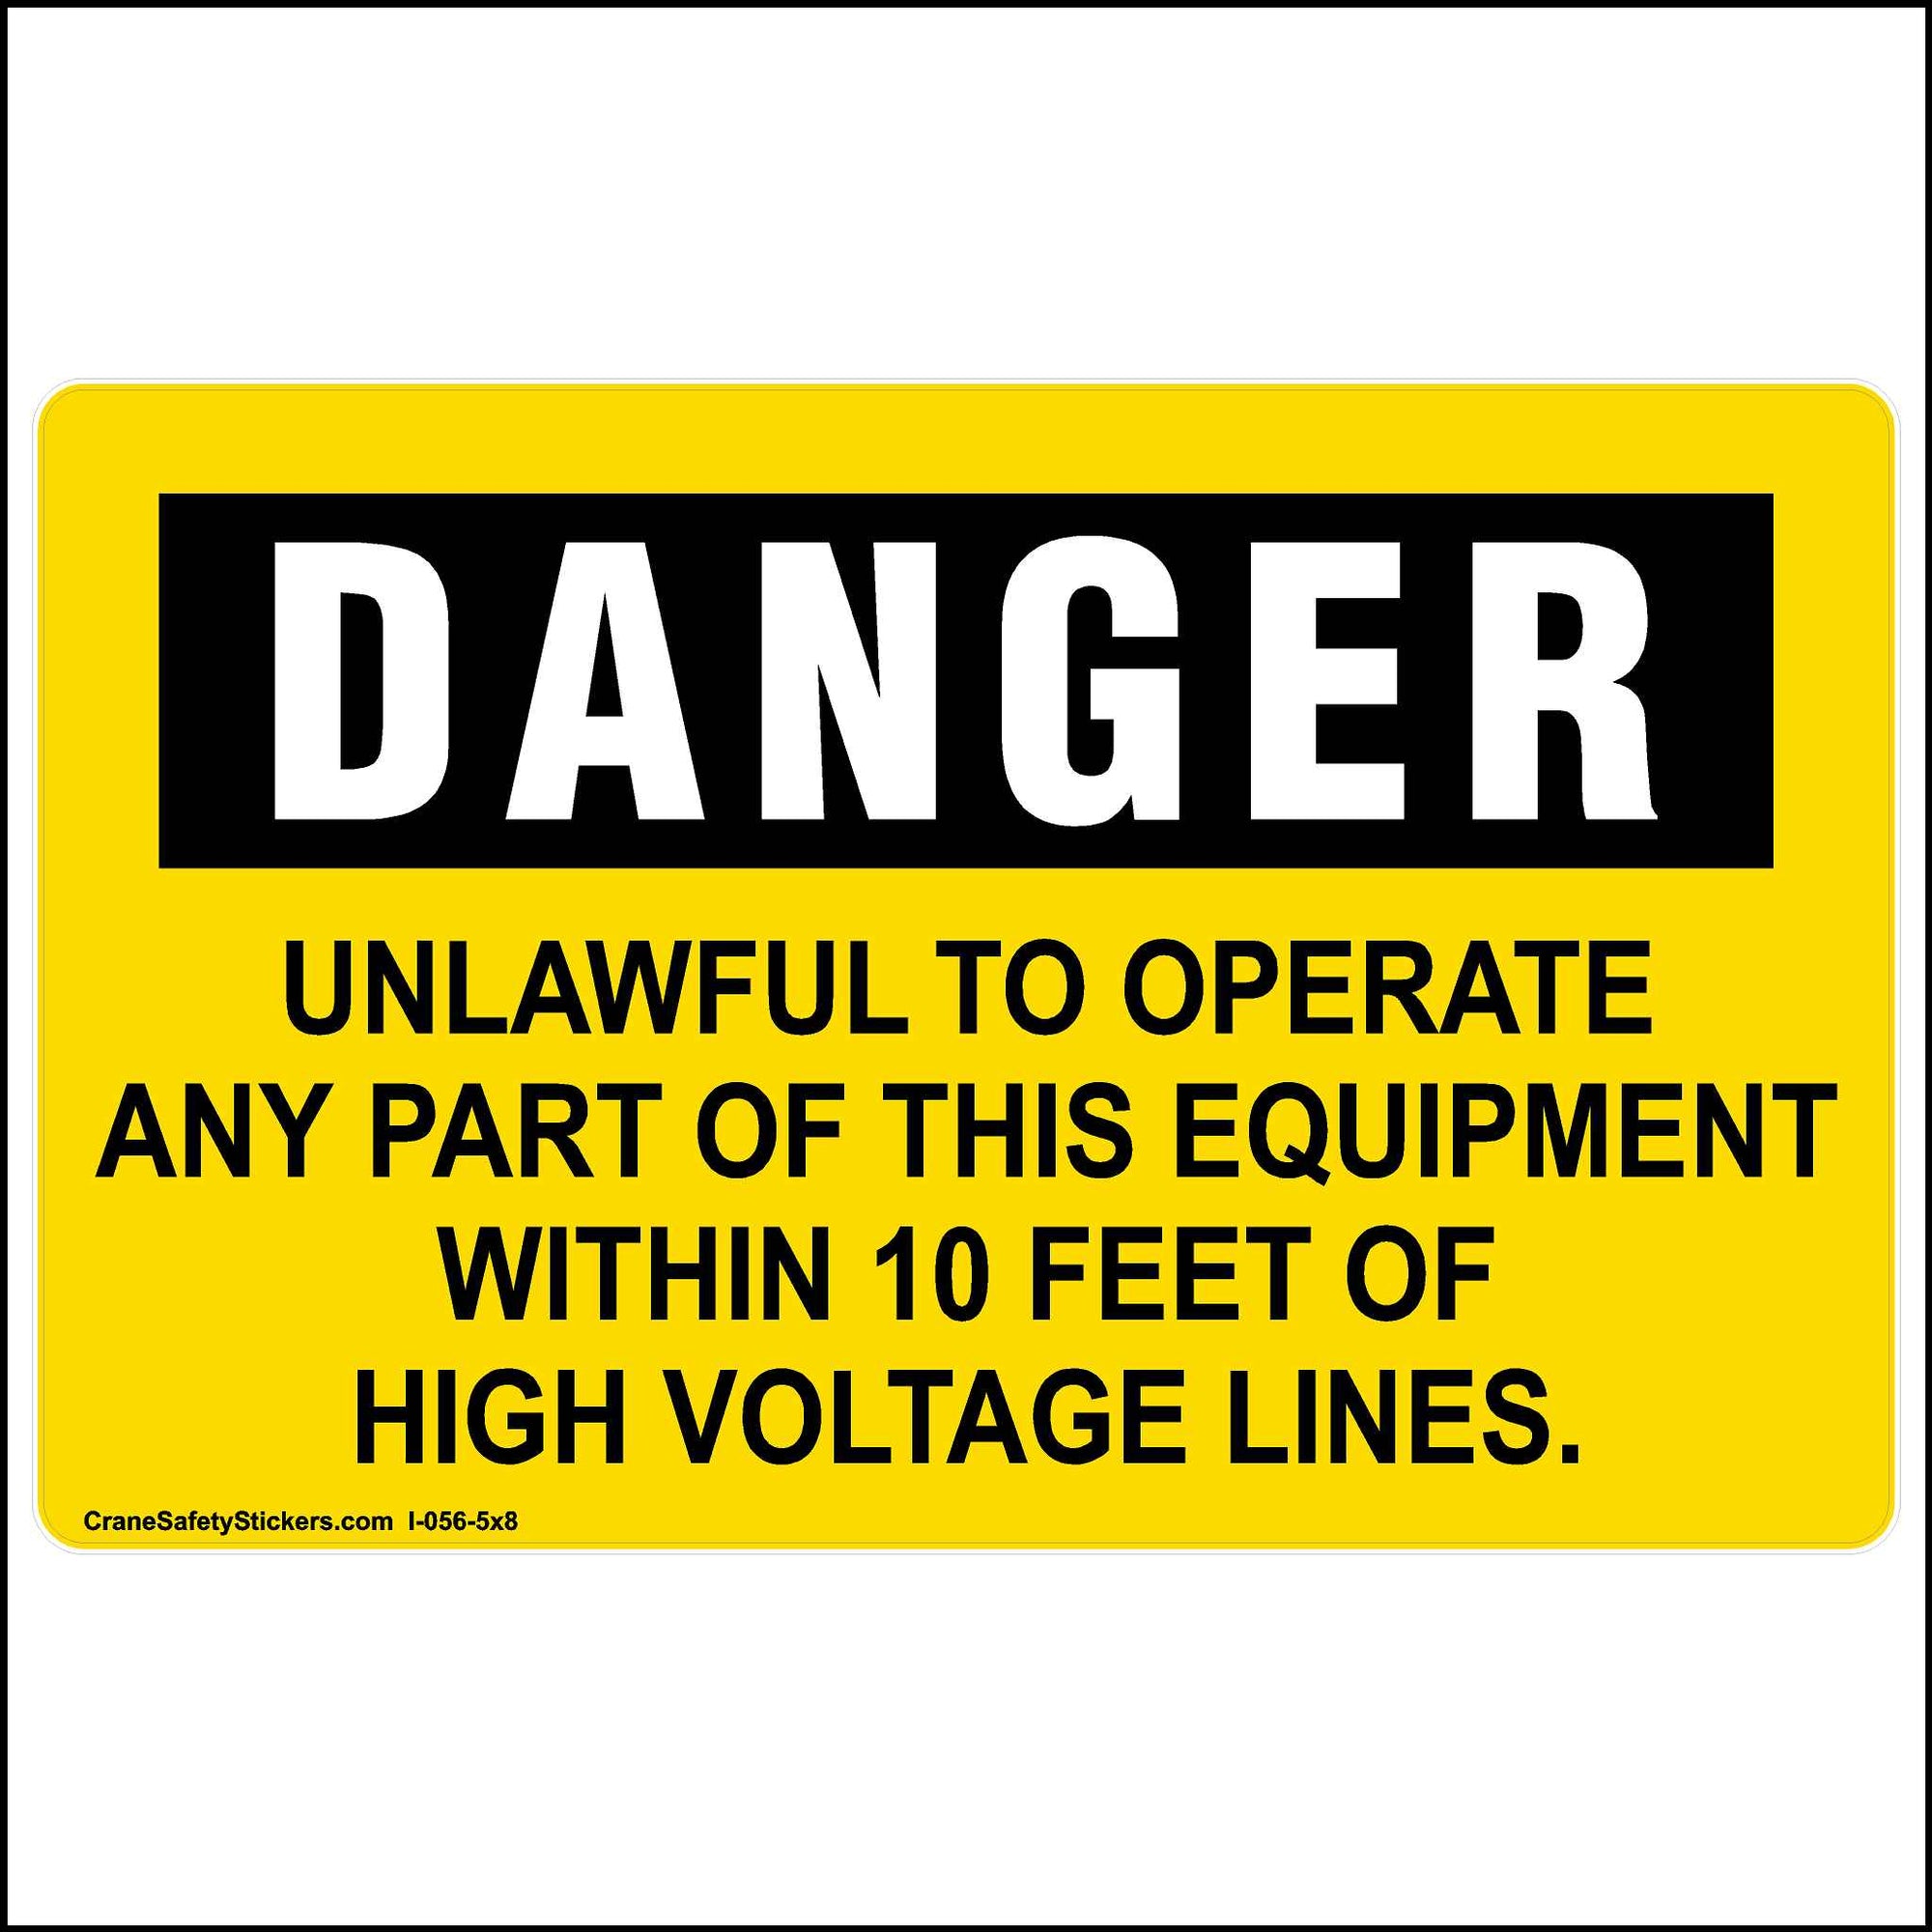 This Danger, Unlawful to Operate Any Part of This Equipment Within 10 Feet of High Voltage Lines Sticker is printed with a yellow background, black lettering and has a black square with the word DANGER is white print.